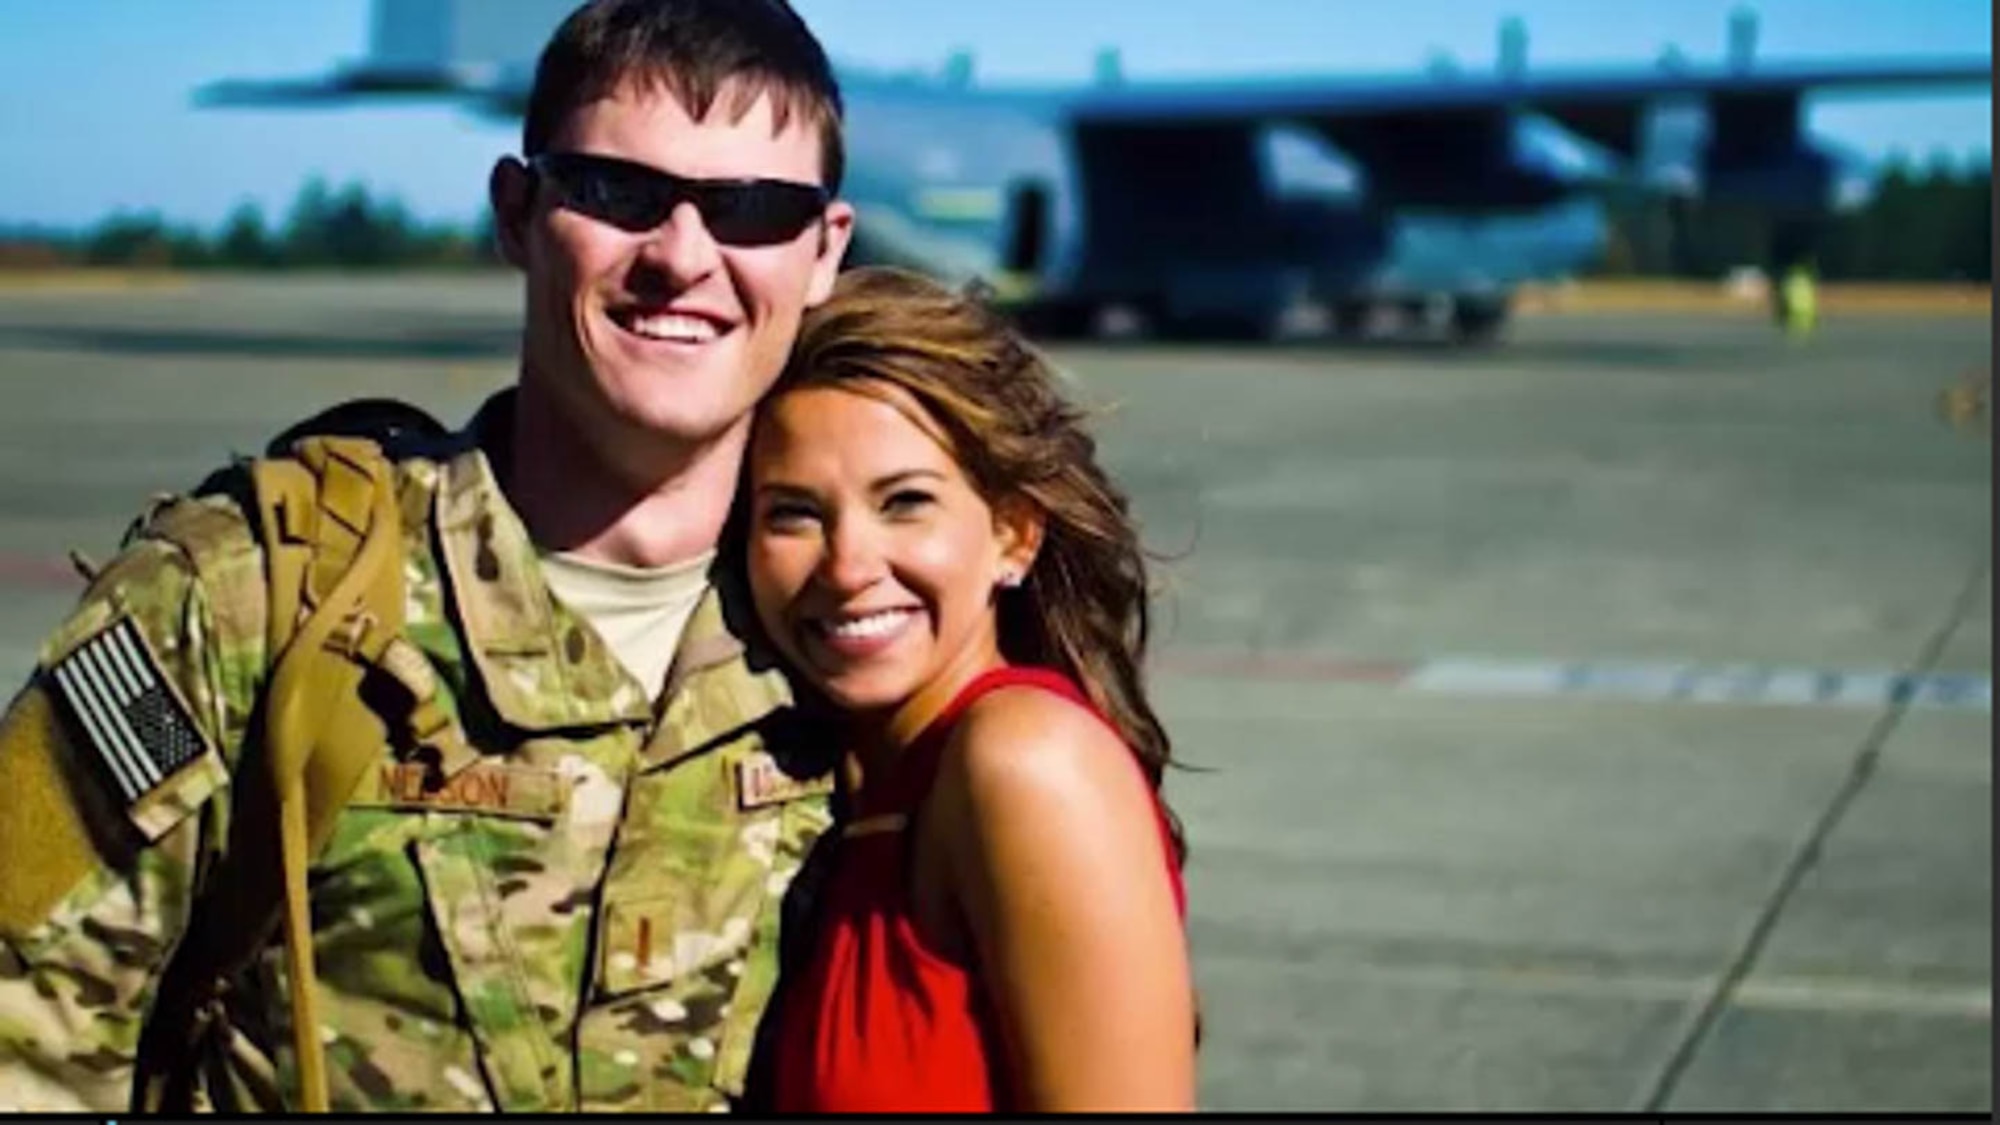 U.S. Air Force 1st Lt. Nate Nelson, 22d Special Tactics Squadron intelligence officer, poses for a photo with his wife Jennifer at McChord Air Force Base, Washington in 2012. Nelson deployed three times to Afghanistan in support of Operation Enduring Freedom. (Courtesy photo)